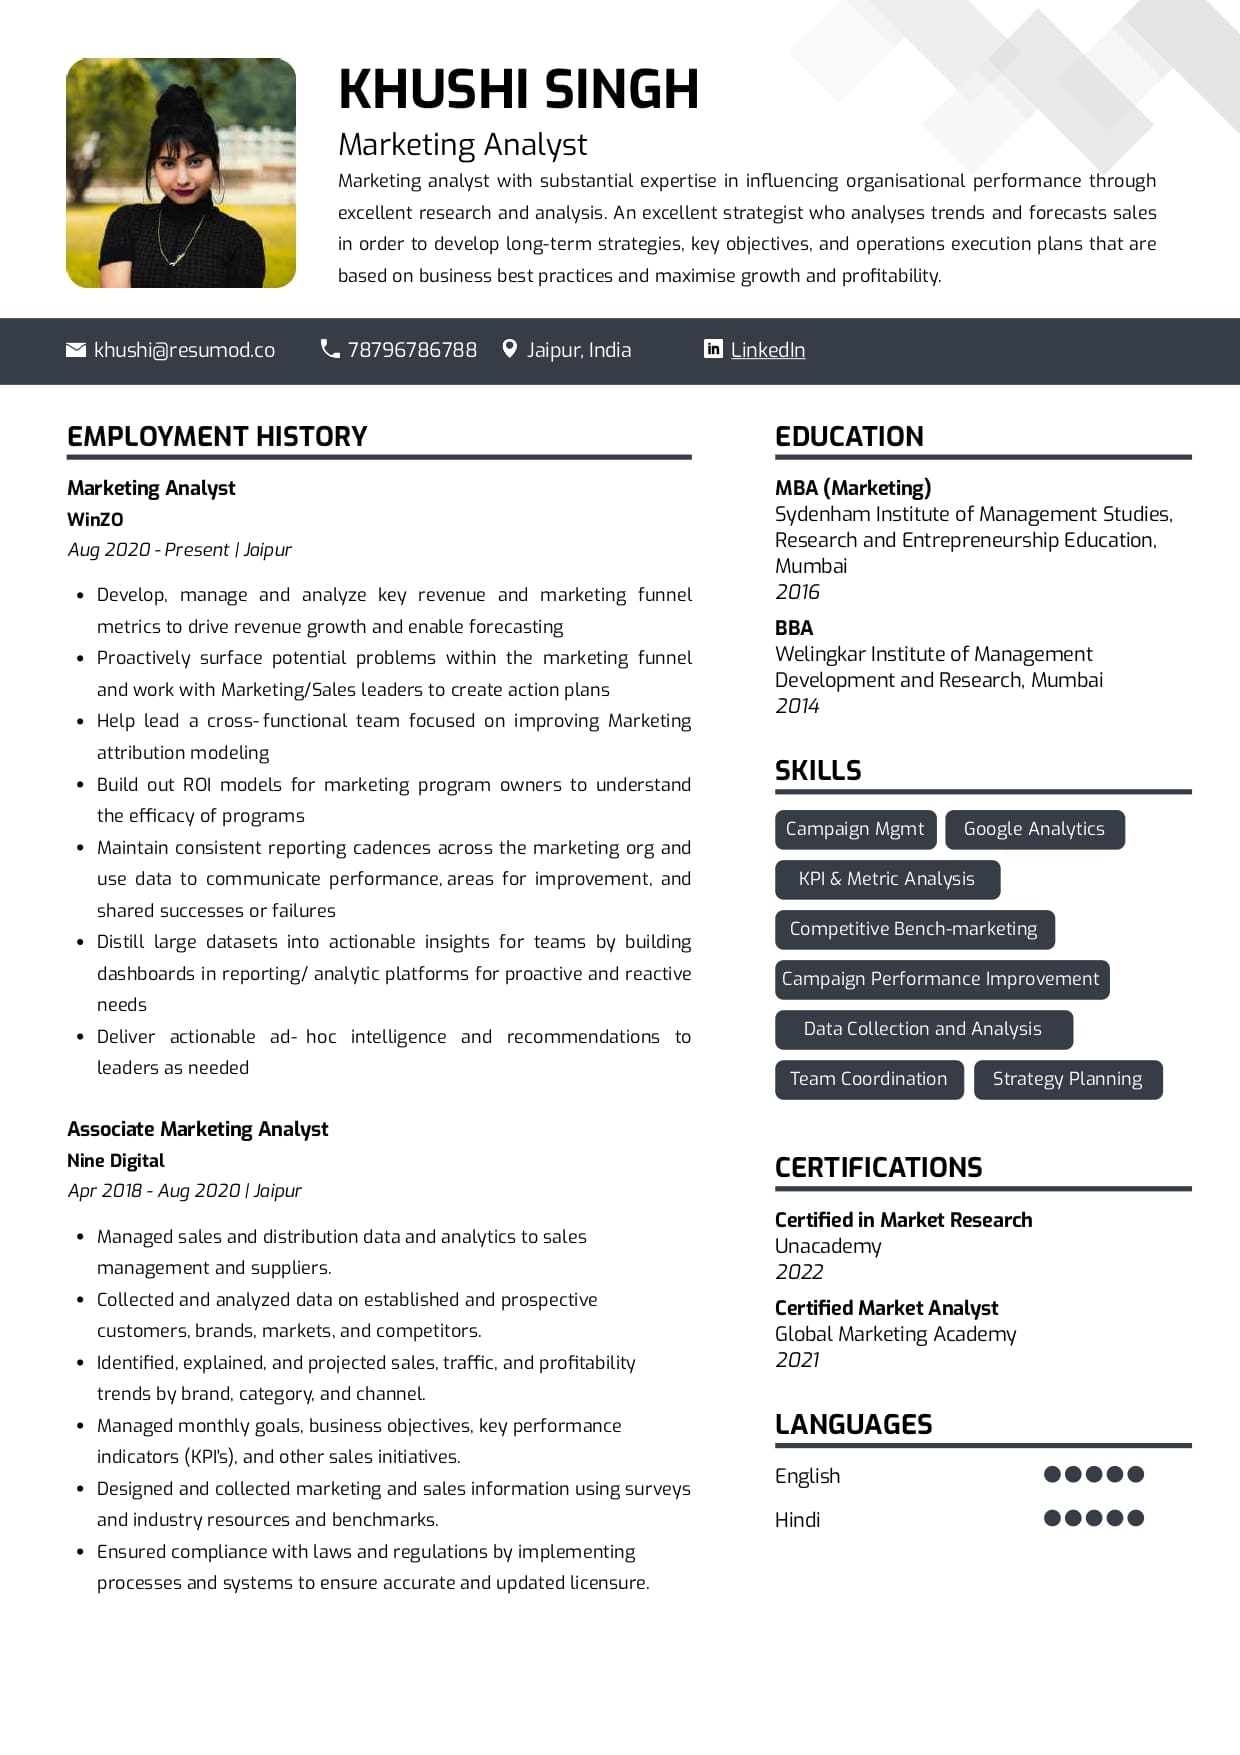 Best Resume Templates Free by Resumod.co